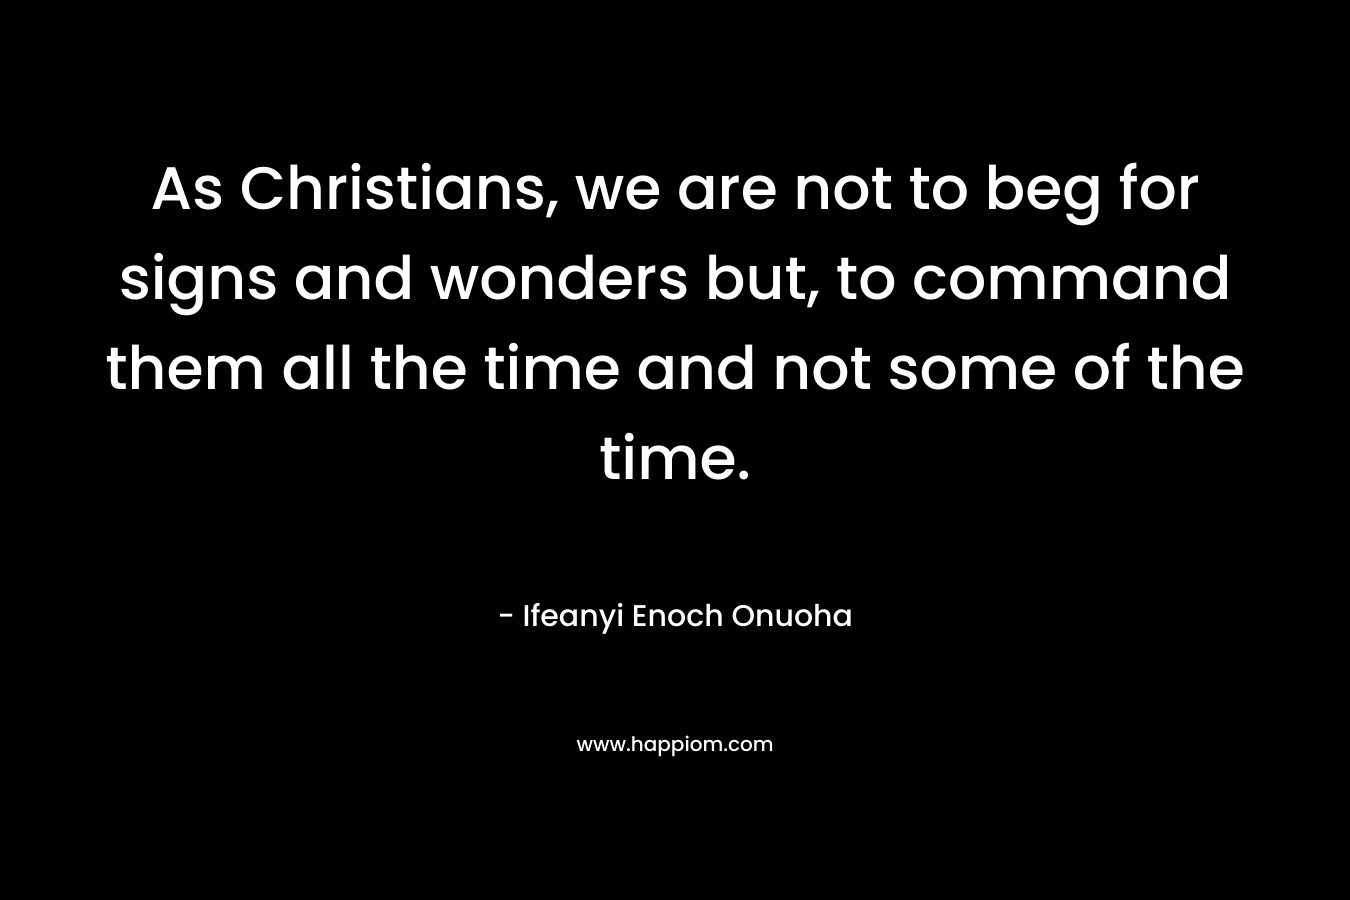 As Christians, we are not to beg for signs and wonders but, to command them all the time and not some of the time.